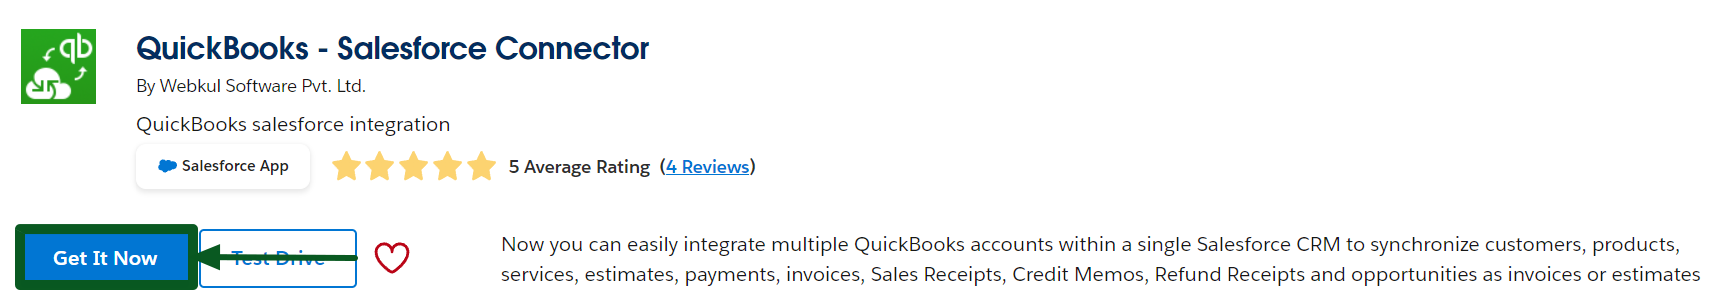 QuickBooks Salesforce Connector in the AppExchange